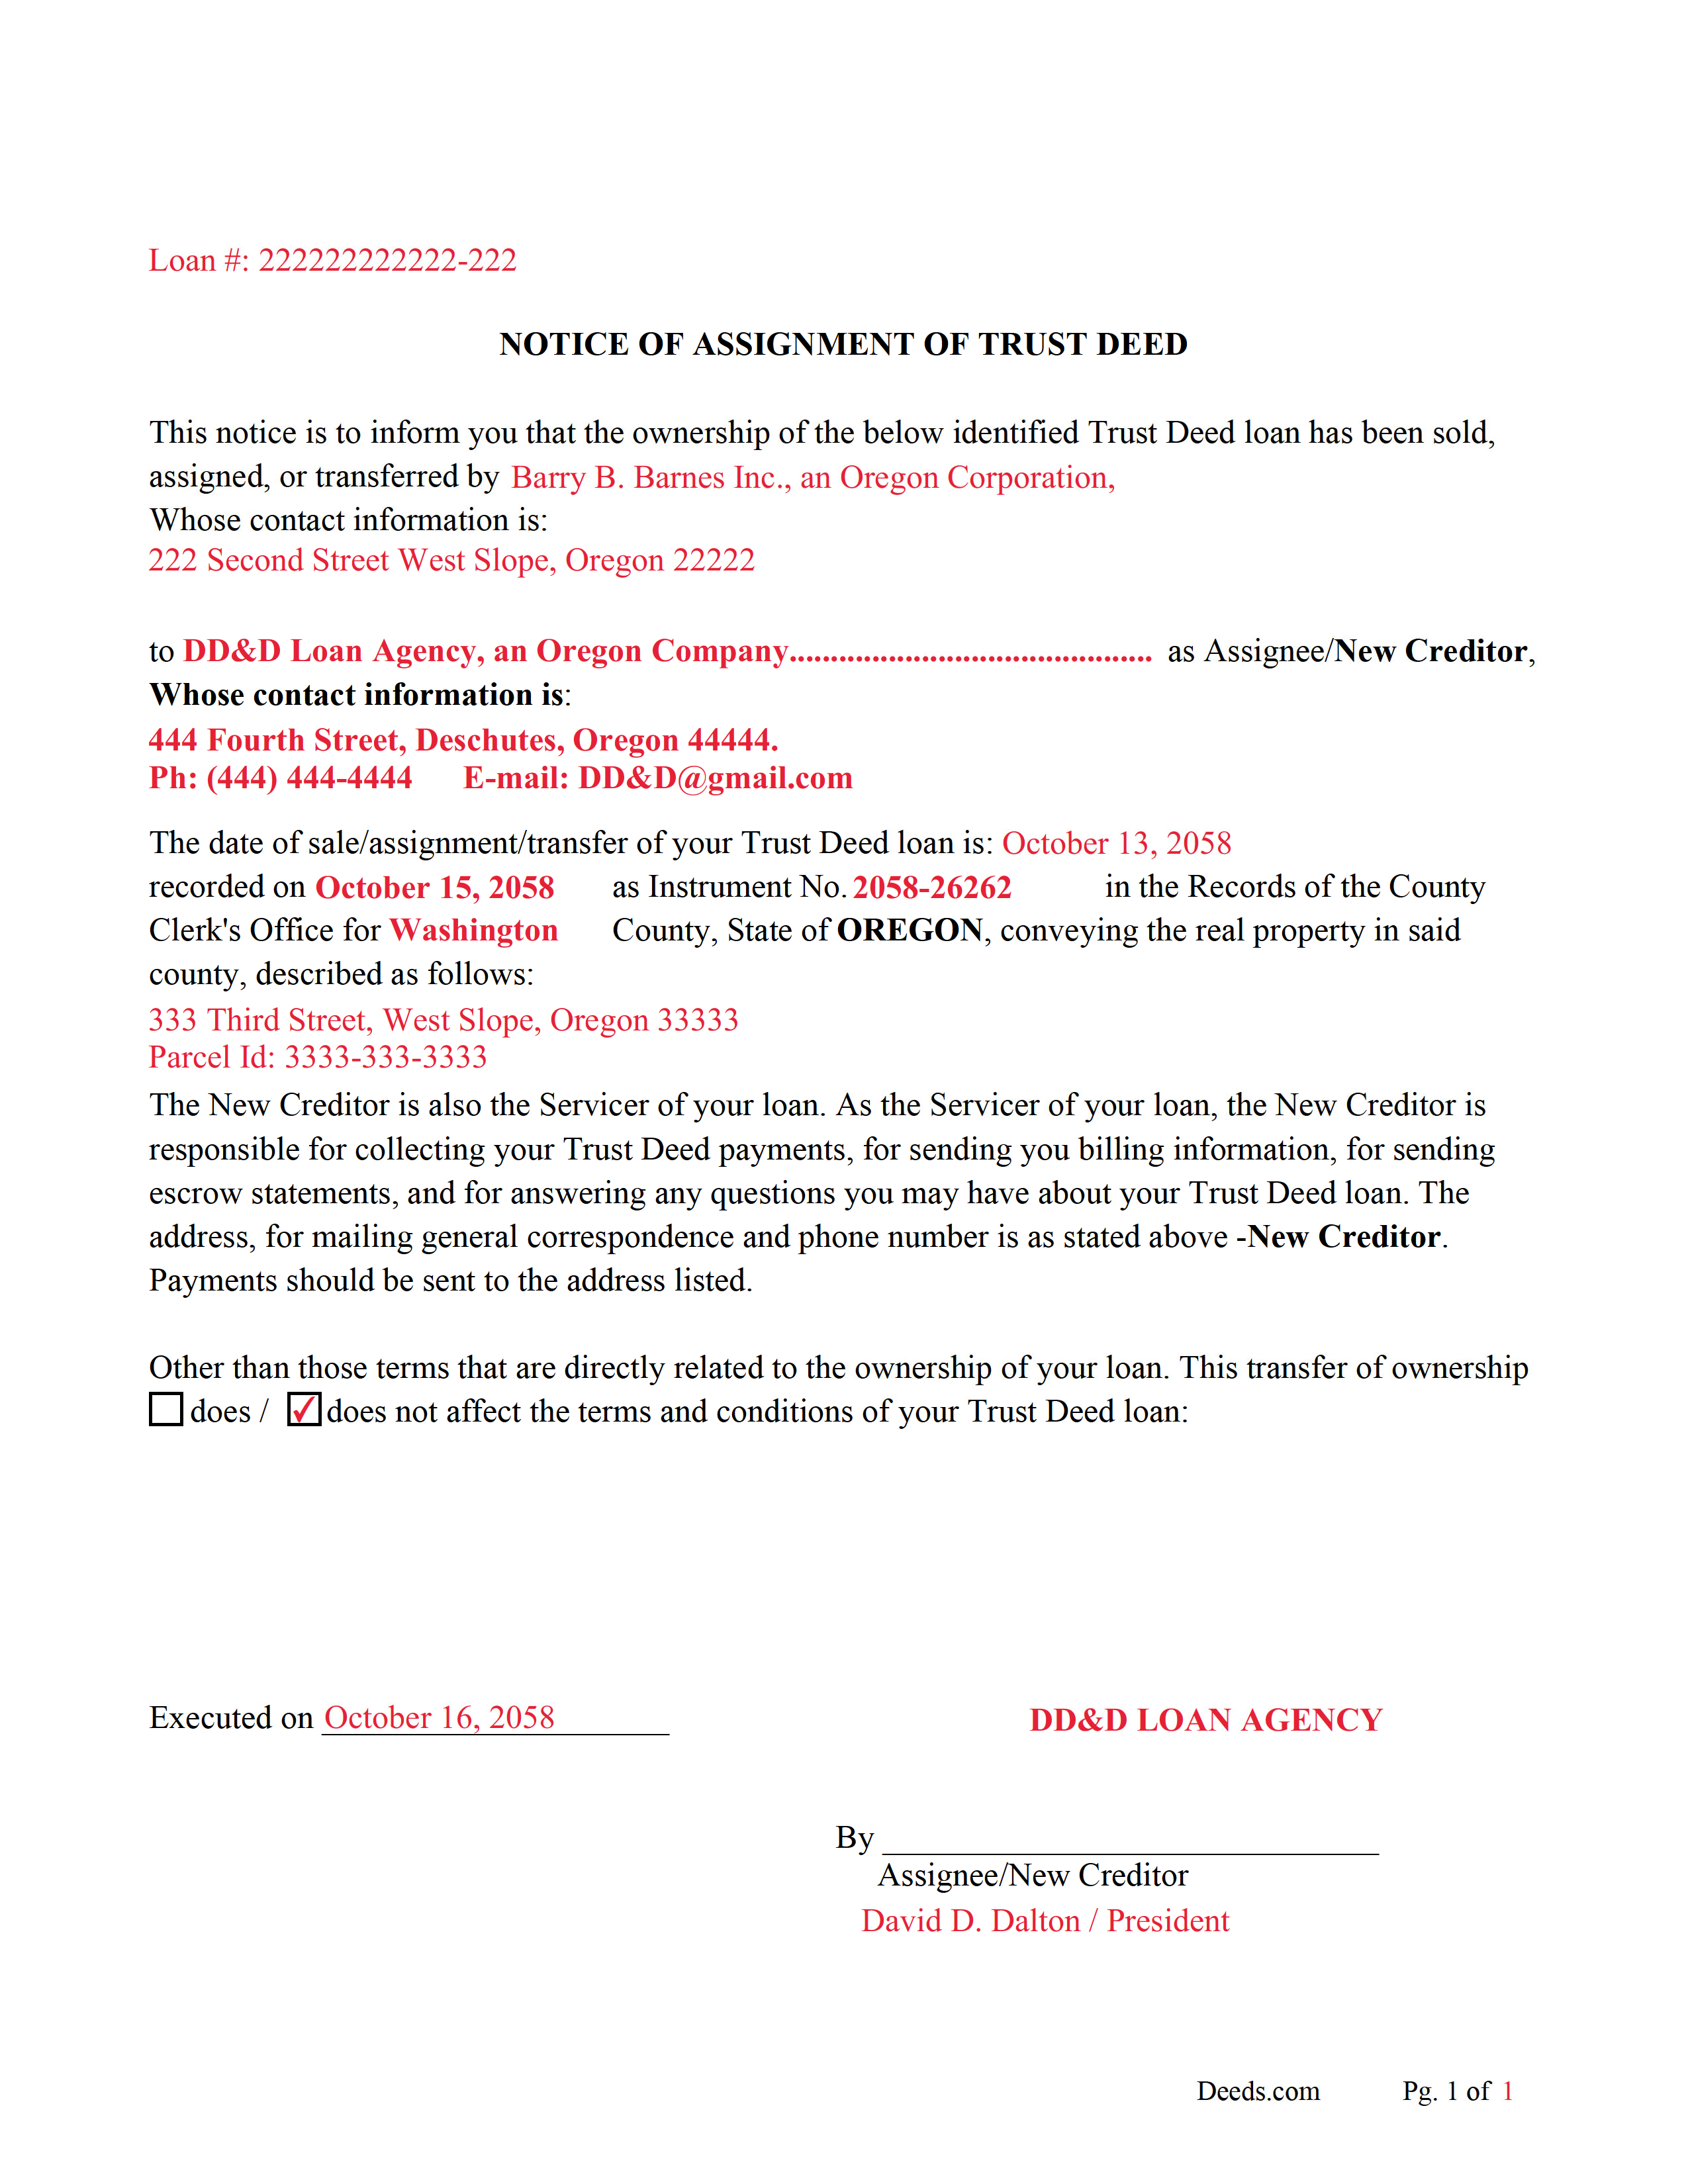 Notice of Assignment-Completed Example